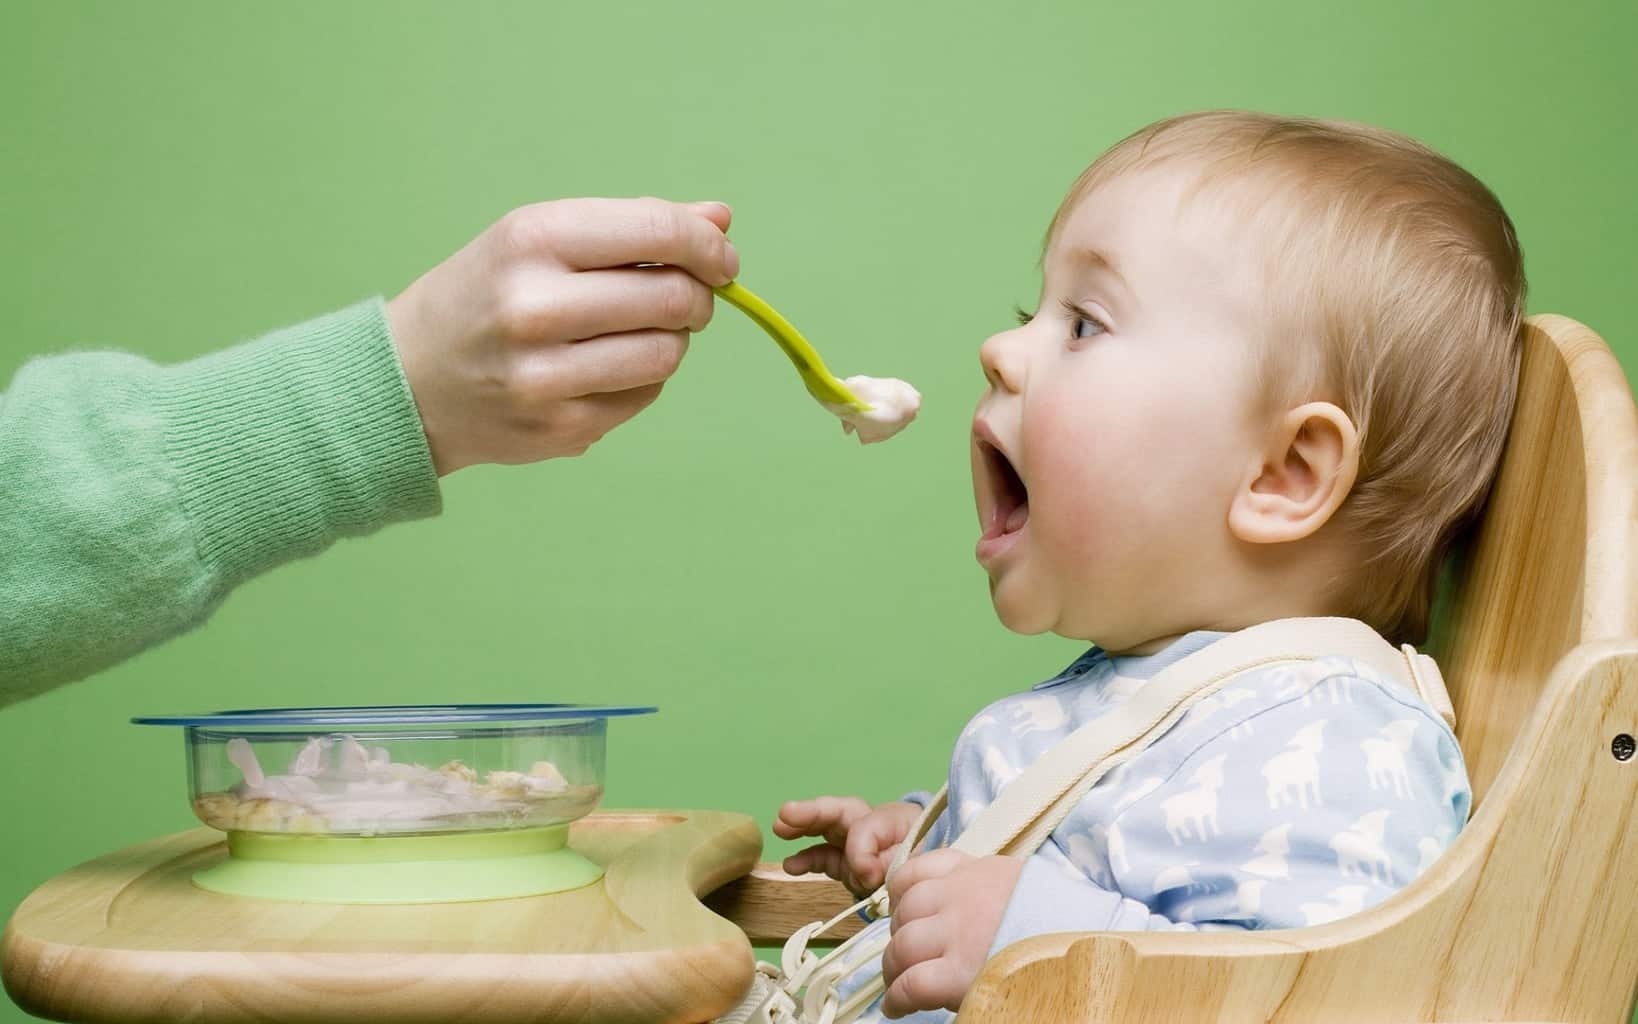 Introducing solids to babies